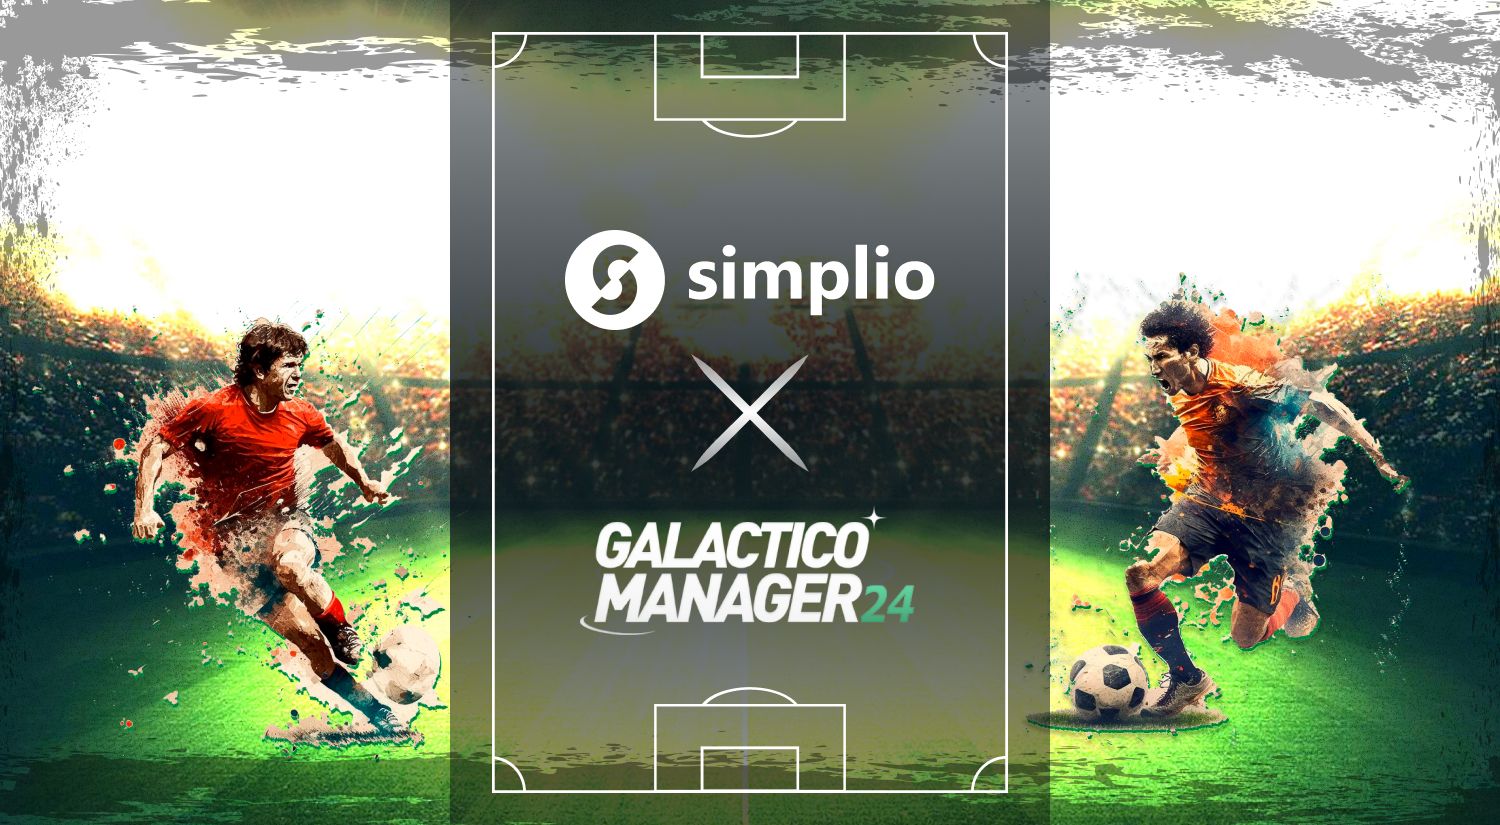 Simplio partners with Galactico Manager, bringing next generation of Football gaming to it’s users